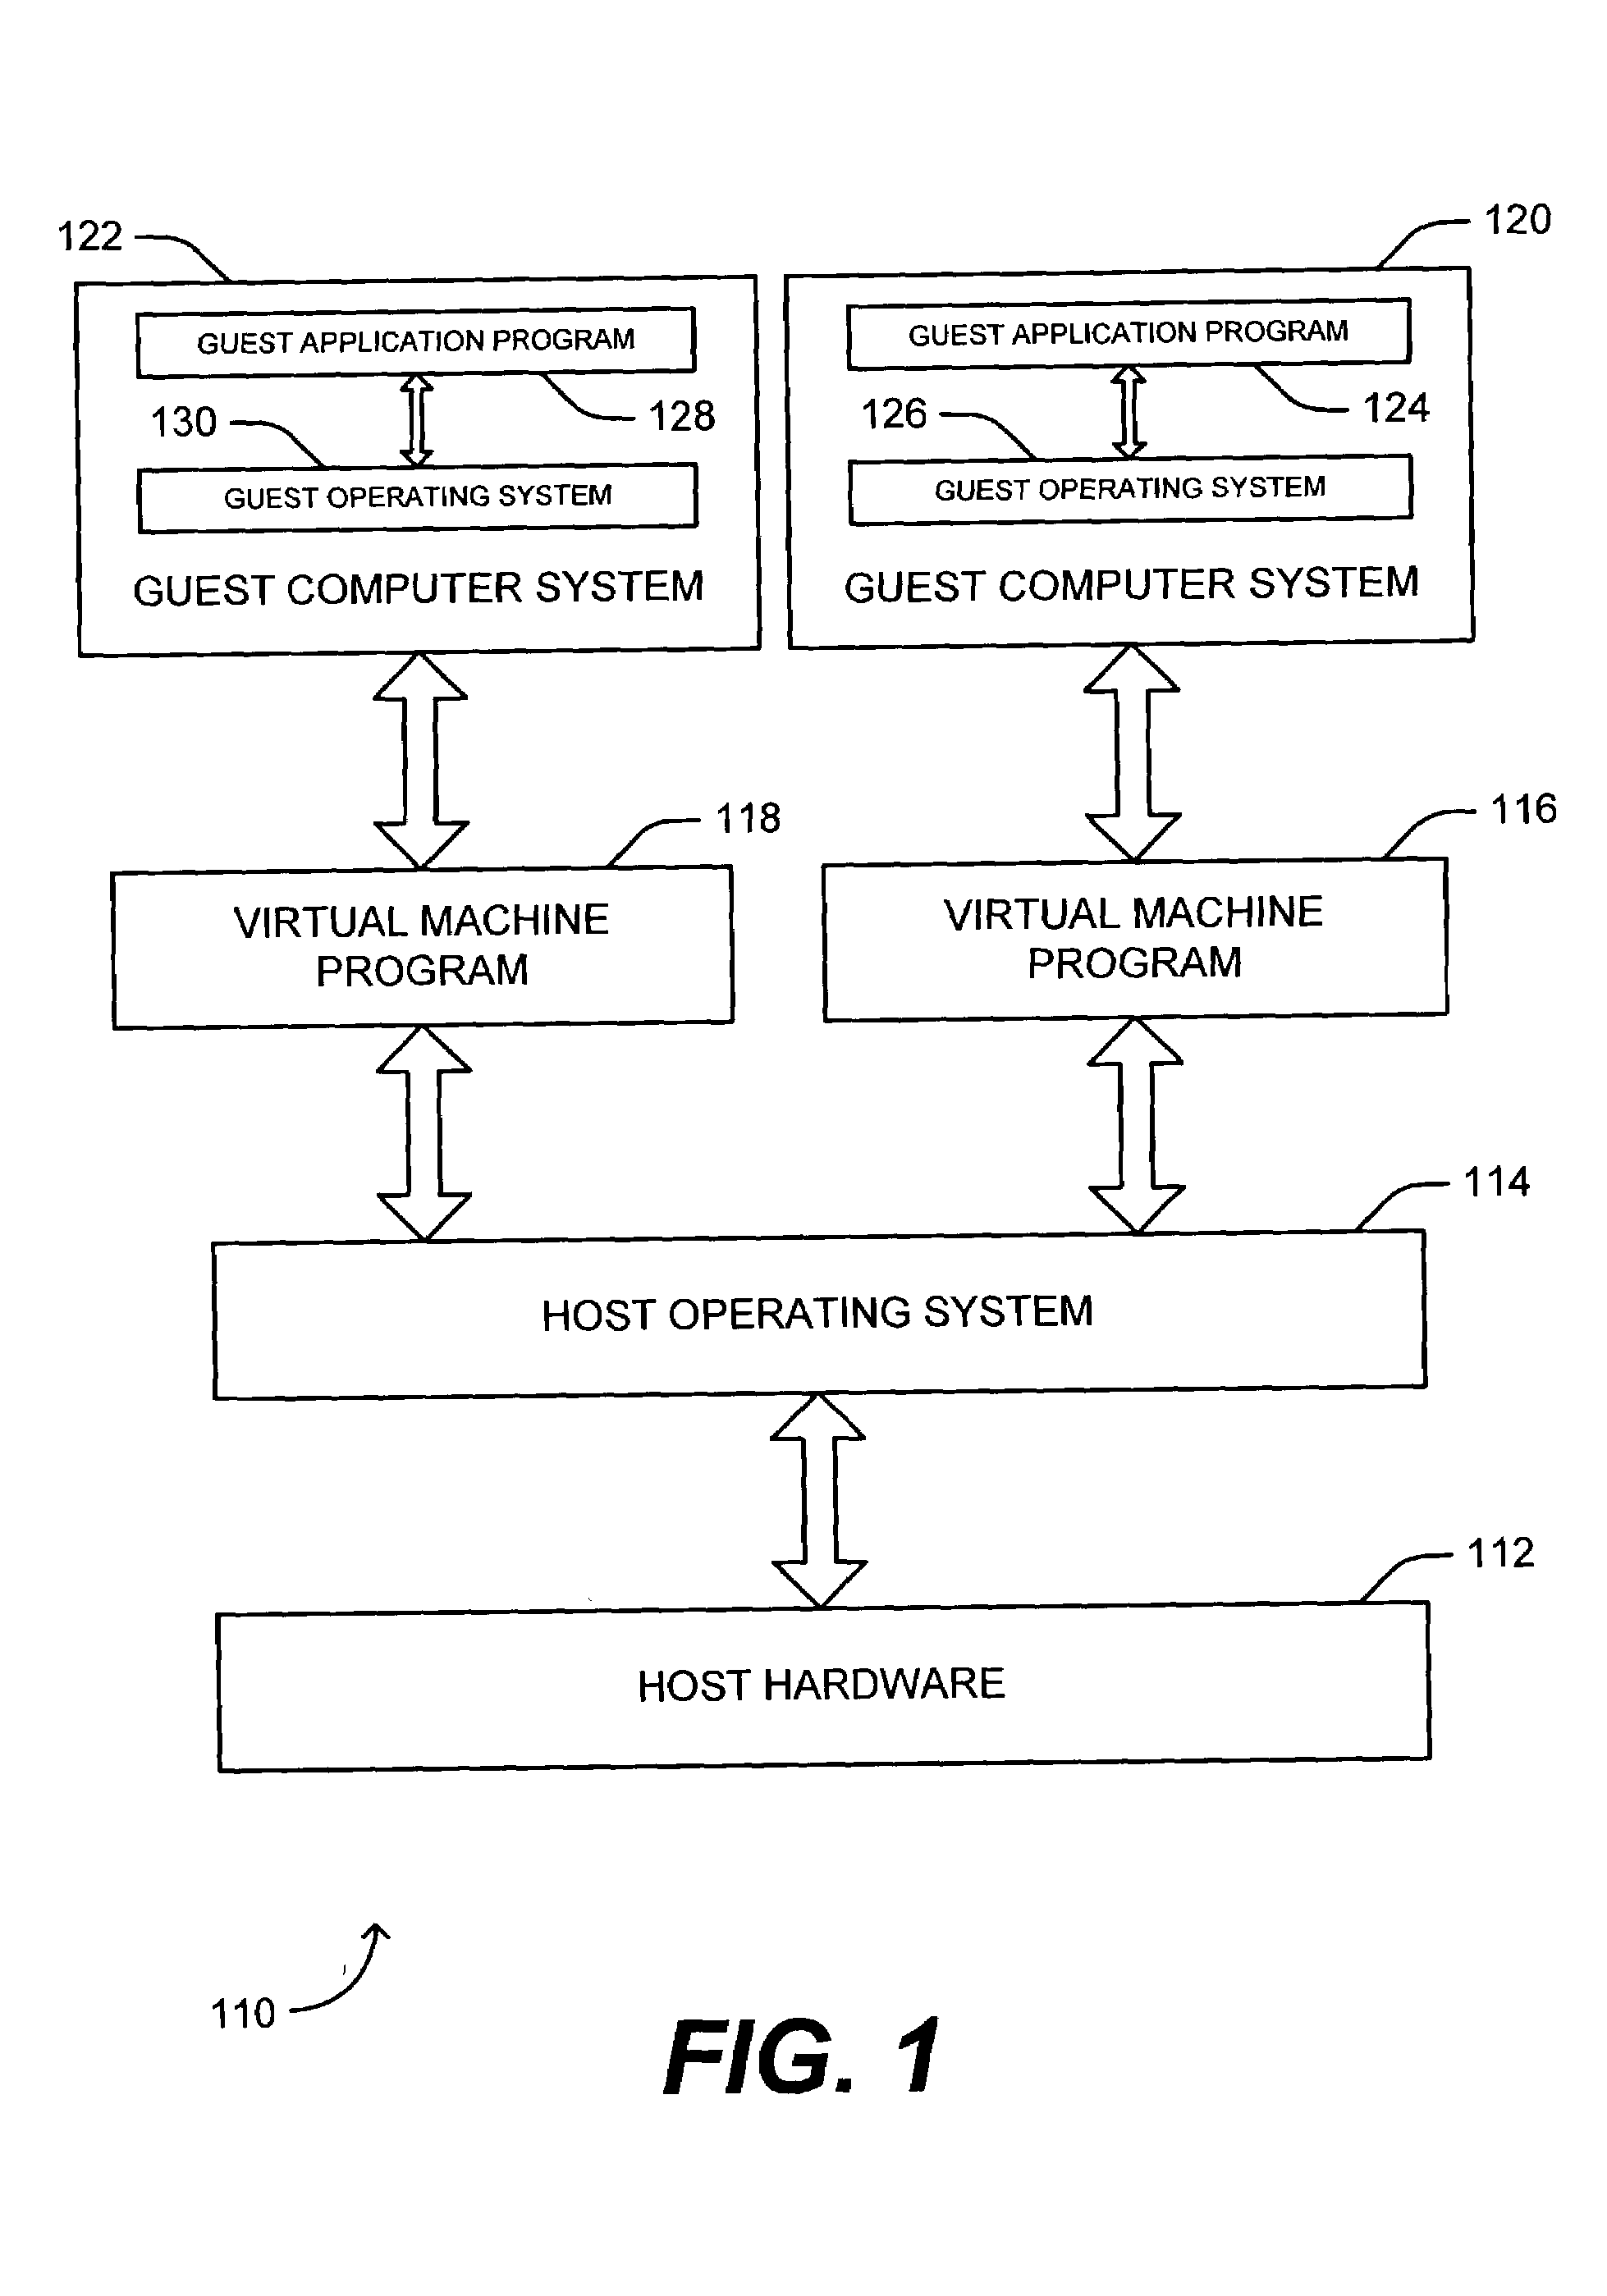 Method for monitoring and emulating privileged instructions of programs in a virtual machine